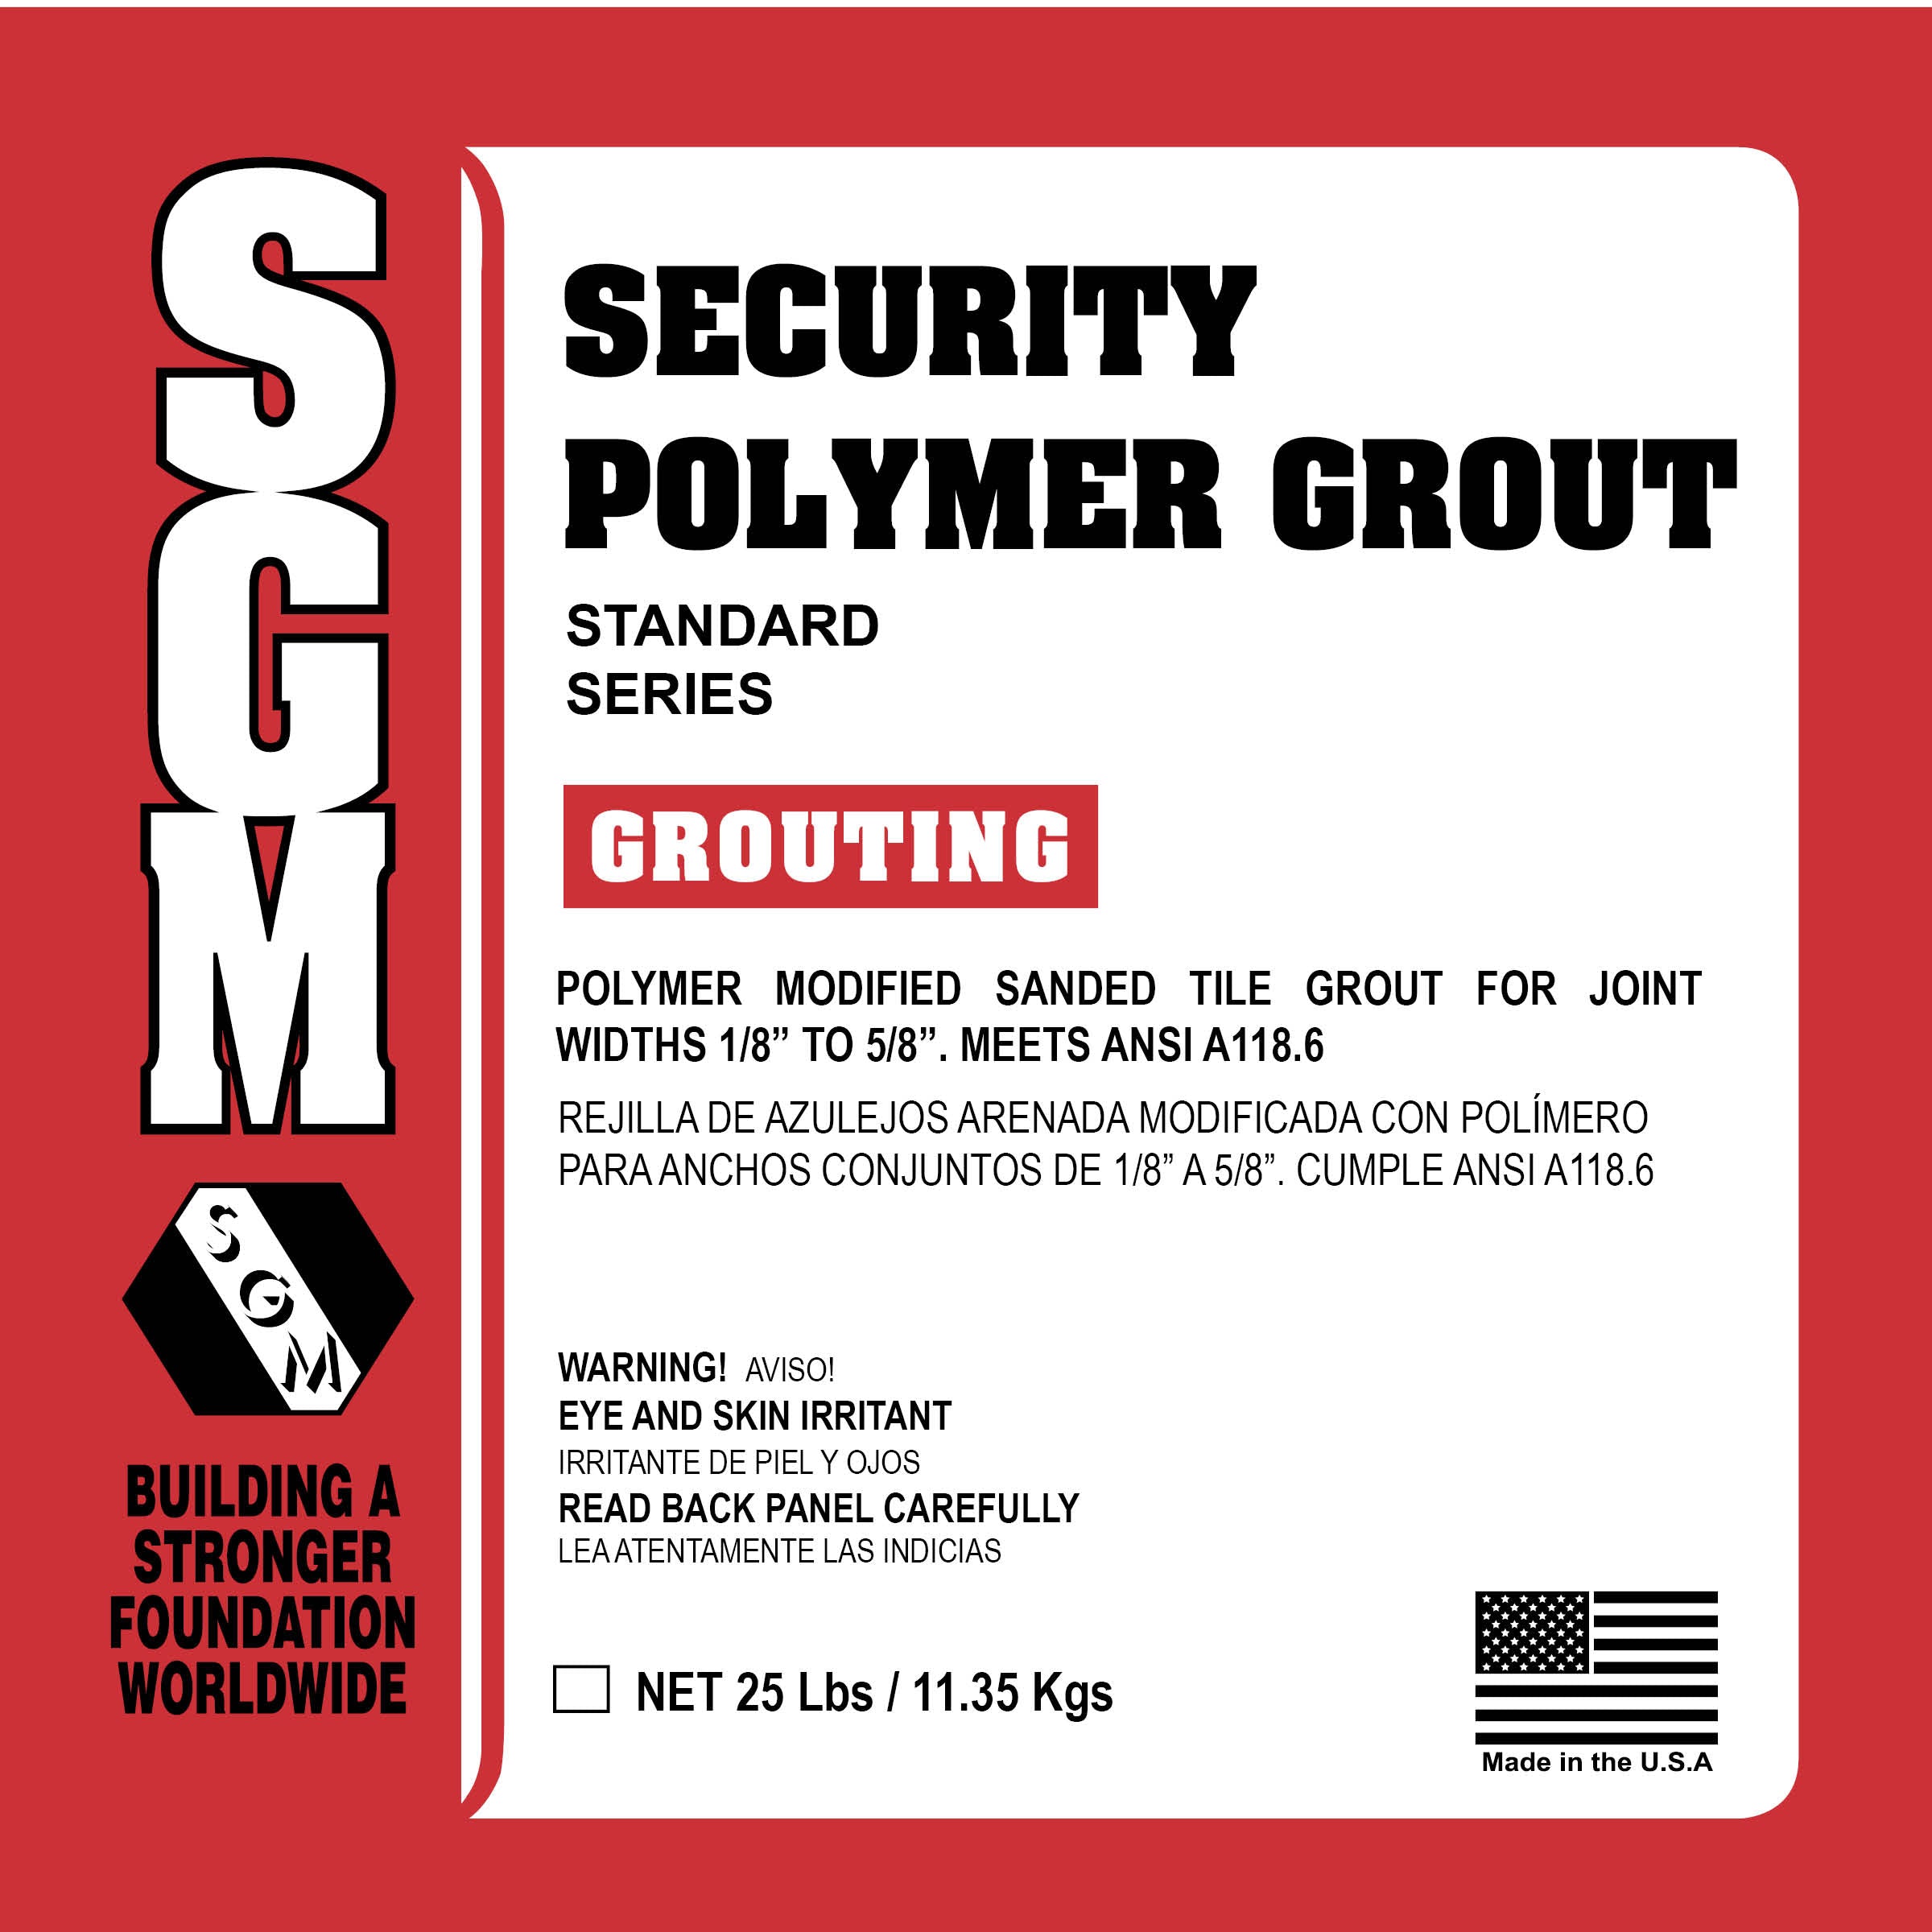 SECURITY POLYMER GROUT